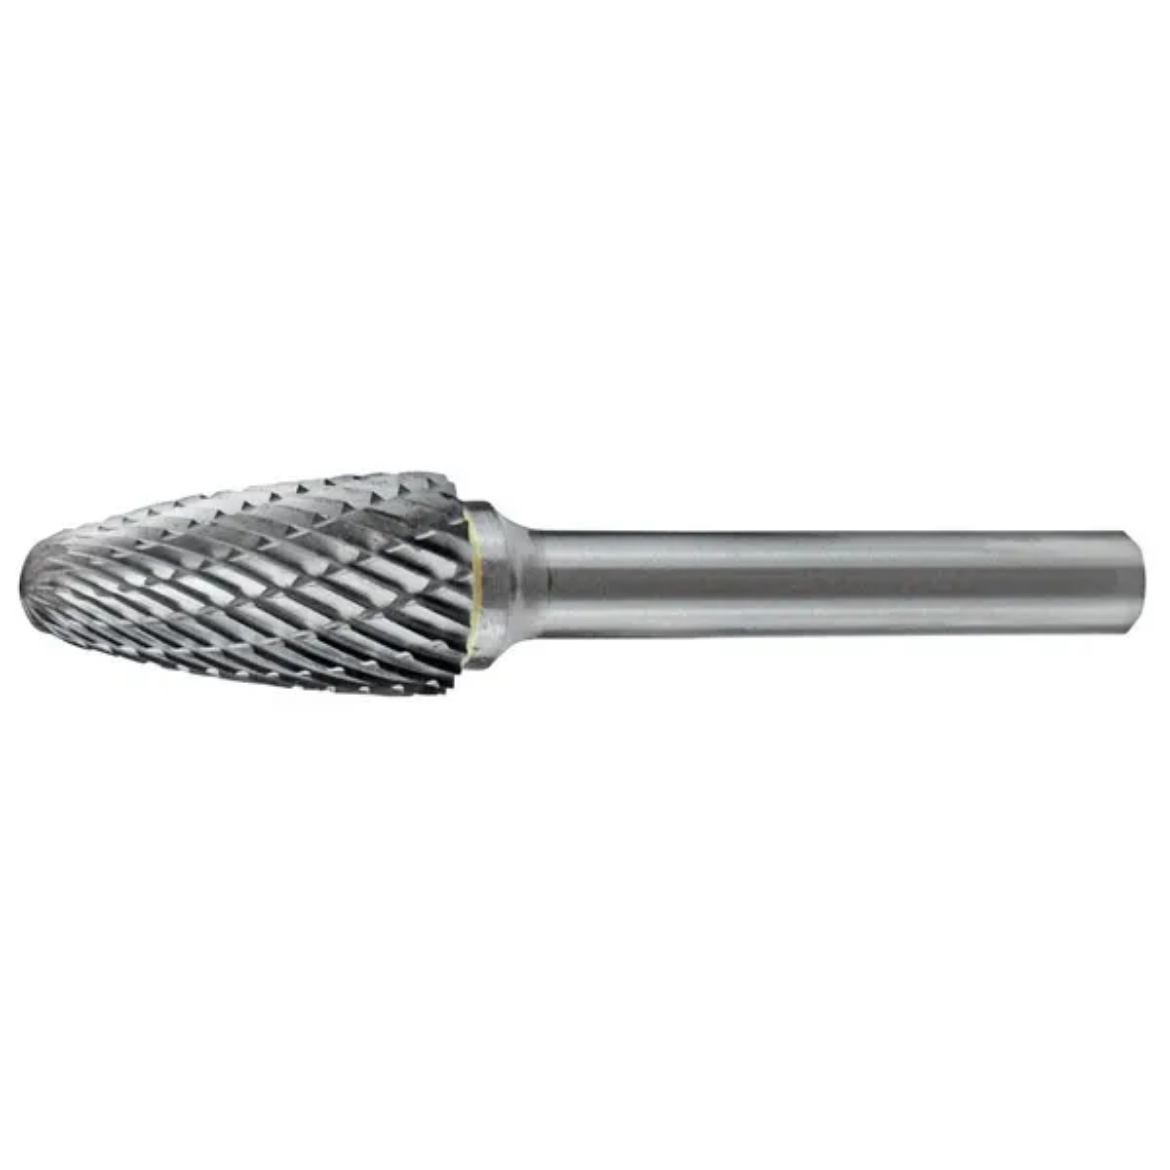 Picture of HOLEMAKER CARBIDE BURR, TREE SHAPE RADIUS END, 7/16" X 1" HEAD, 1/4" SHANK DC